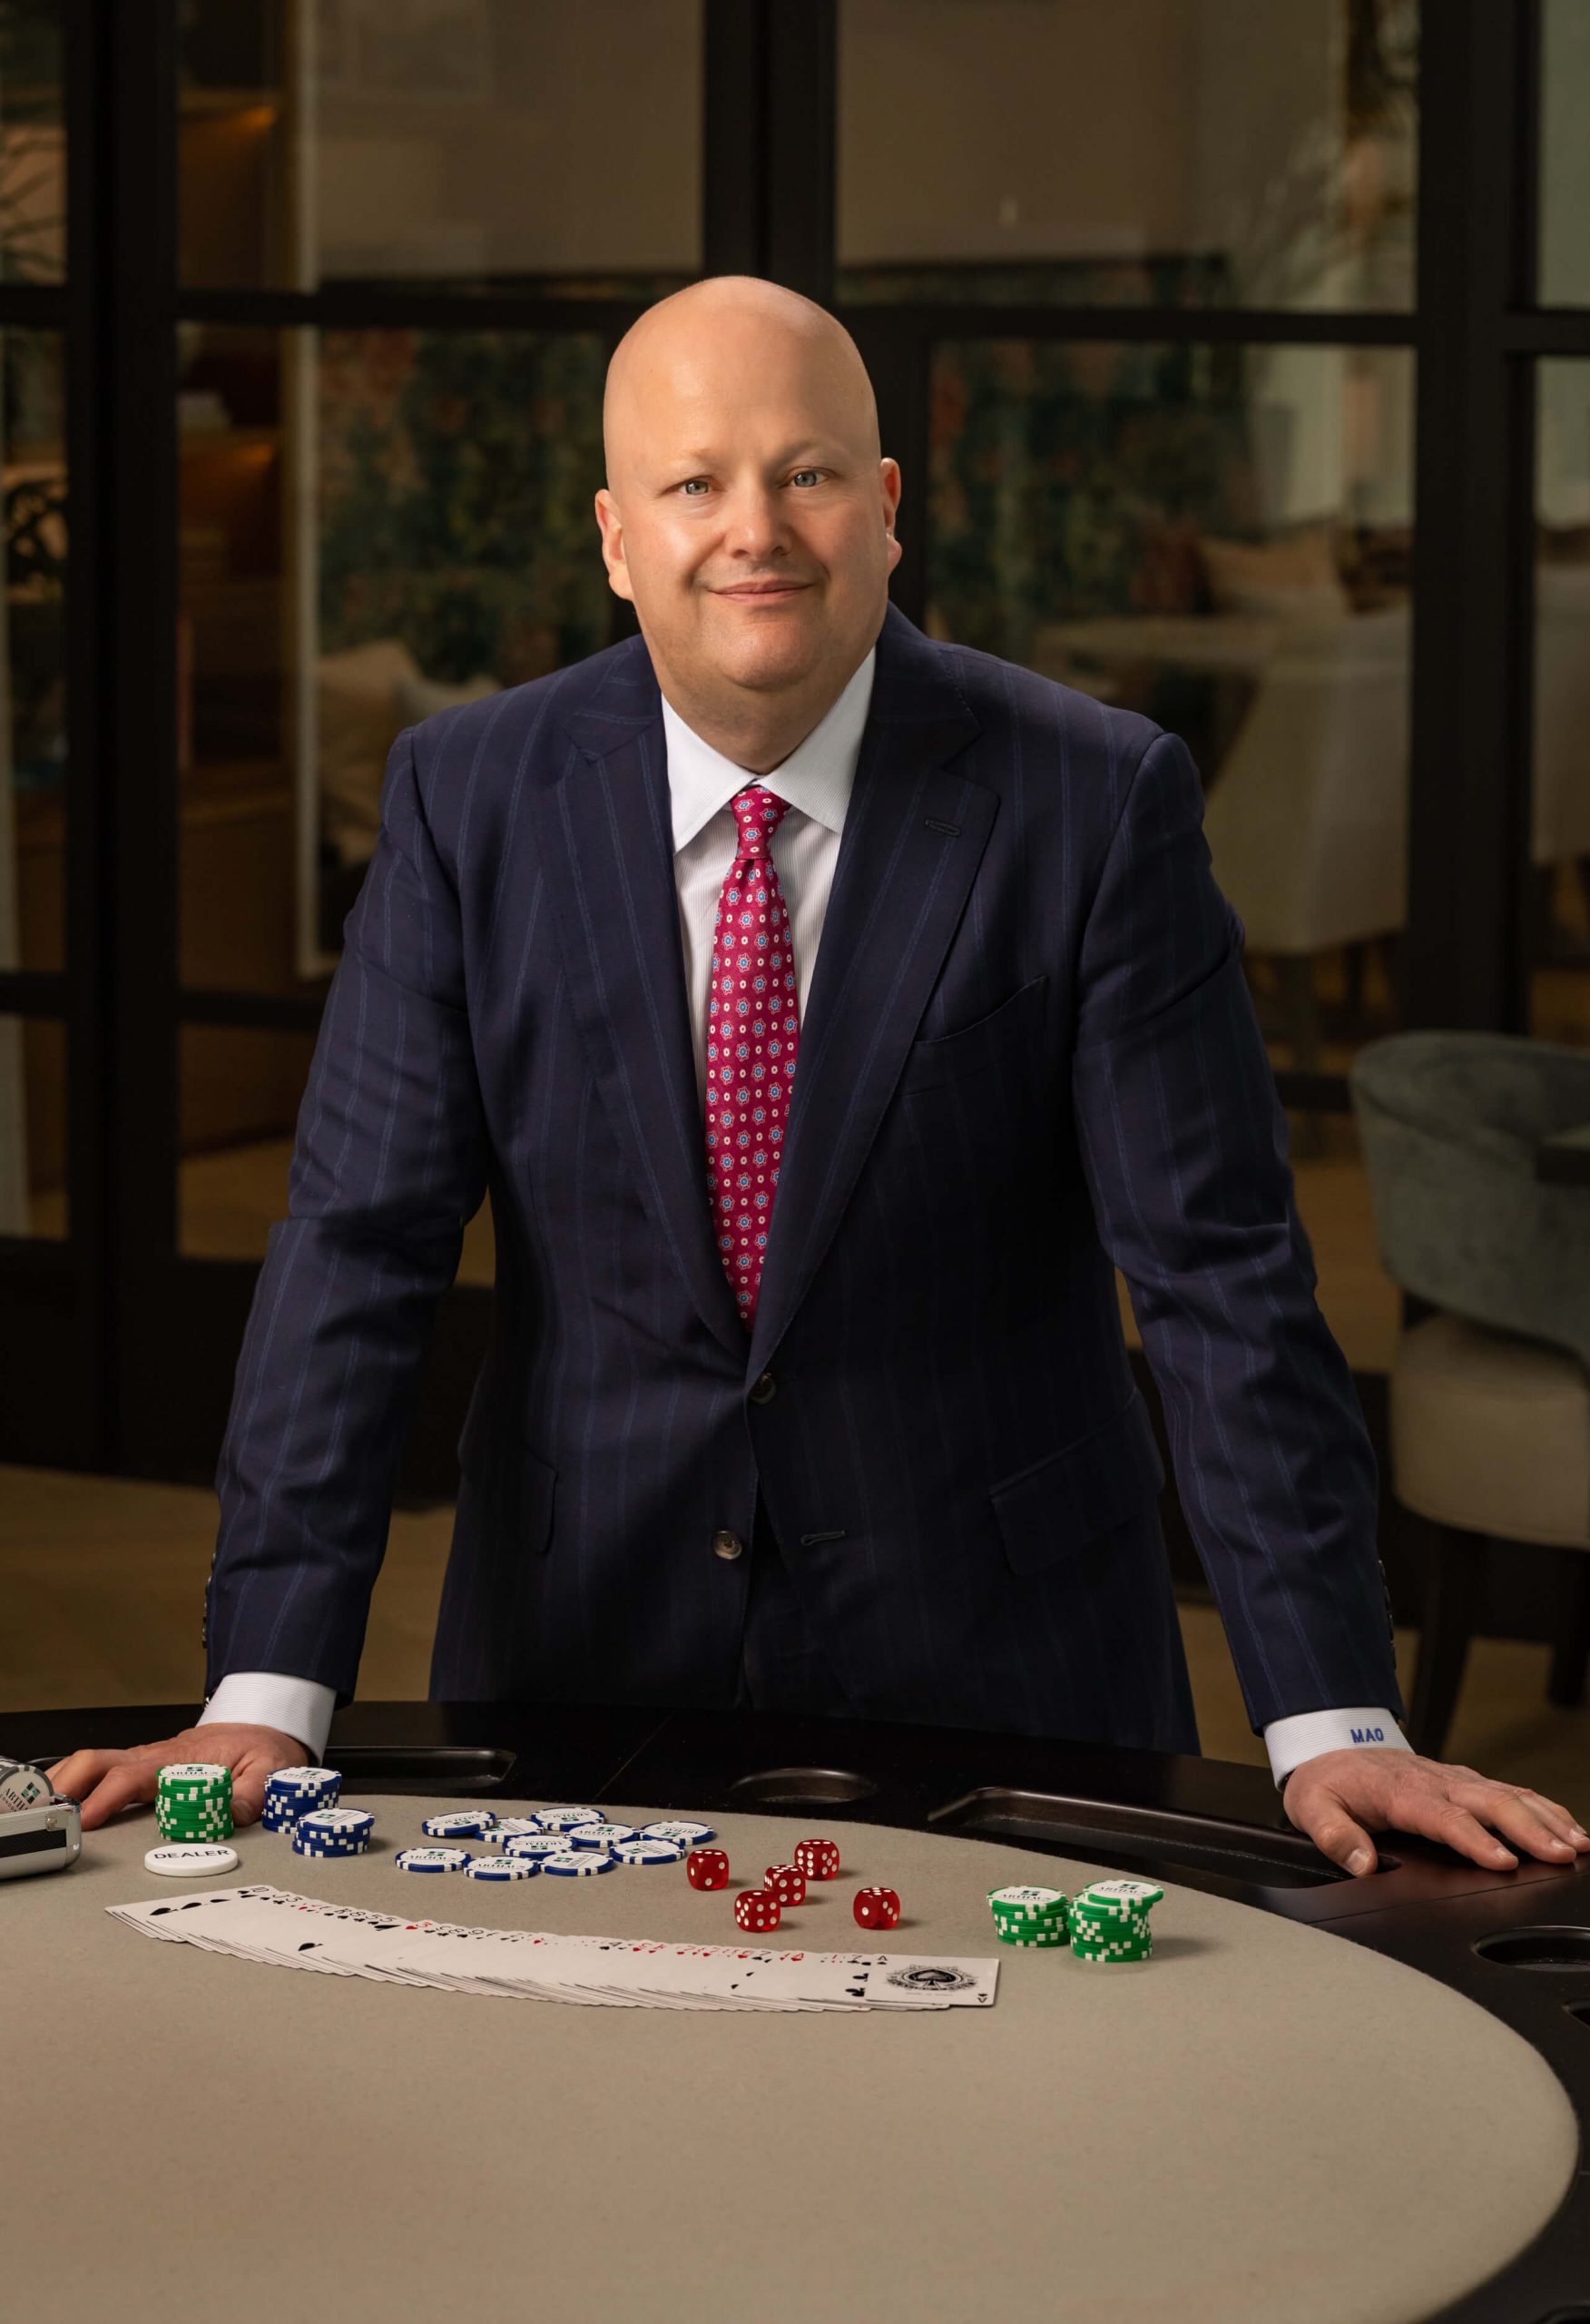 man in pinstripe suit at poker table